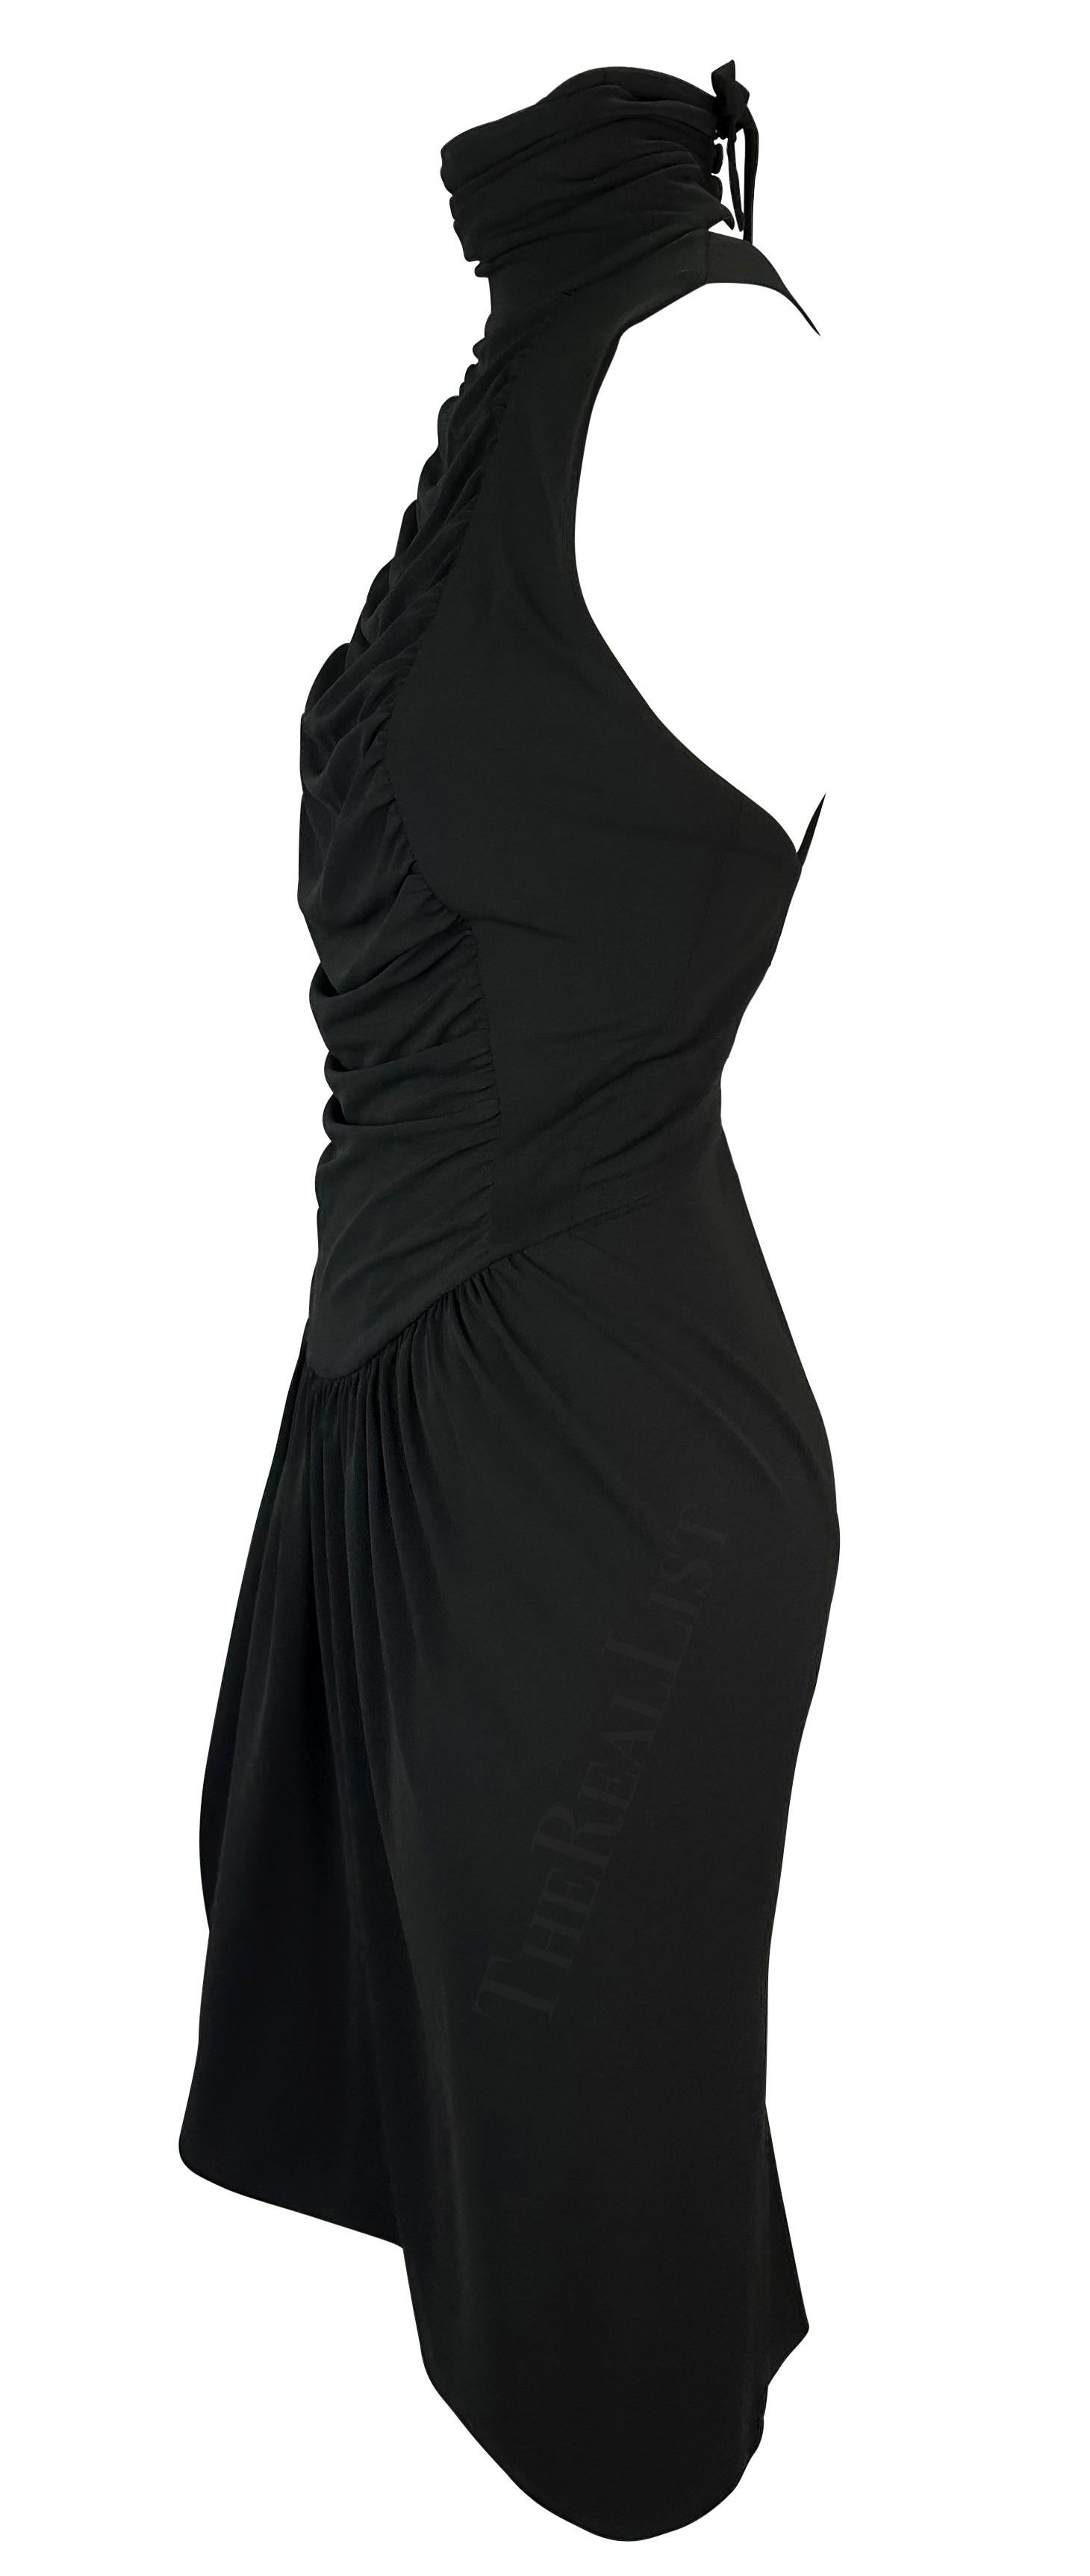 S/S 2003 Karl Lagerfeld Gallery Runway Black Backless Ruched Midi Dress For Sale 3